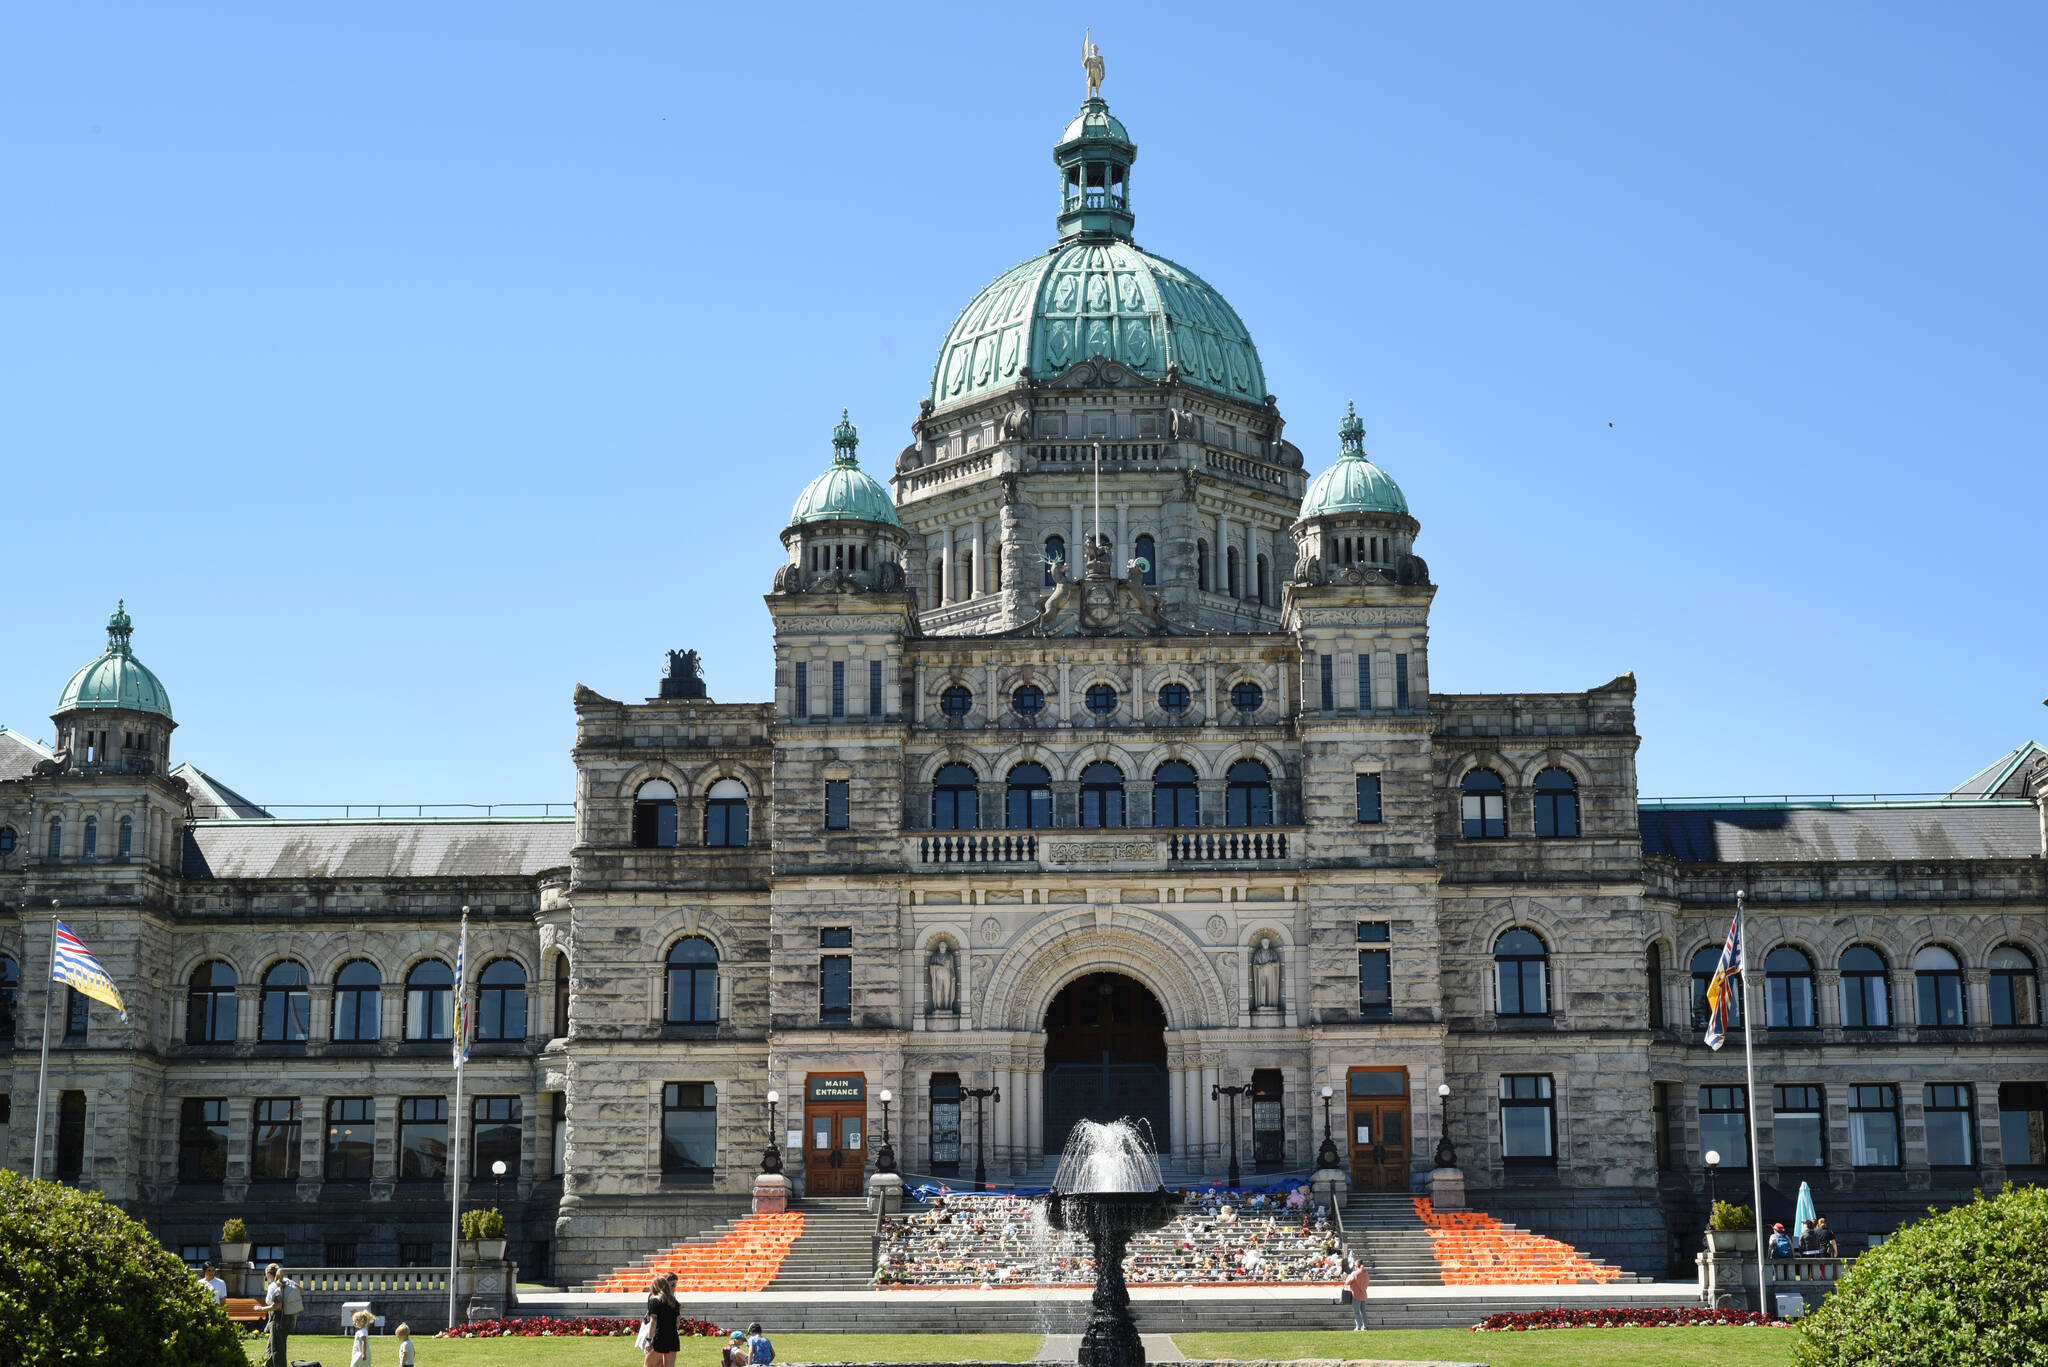 B.C.’s bill 13 was approved in the legislature on April 4. (Don Denton)